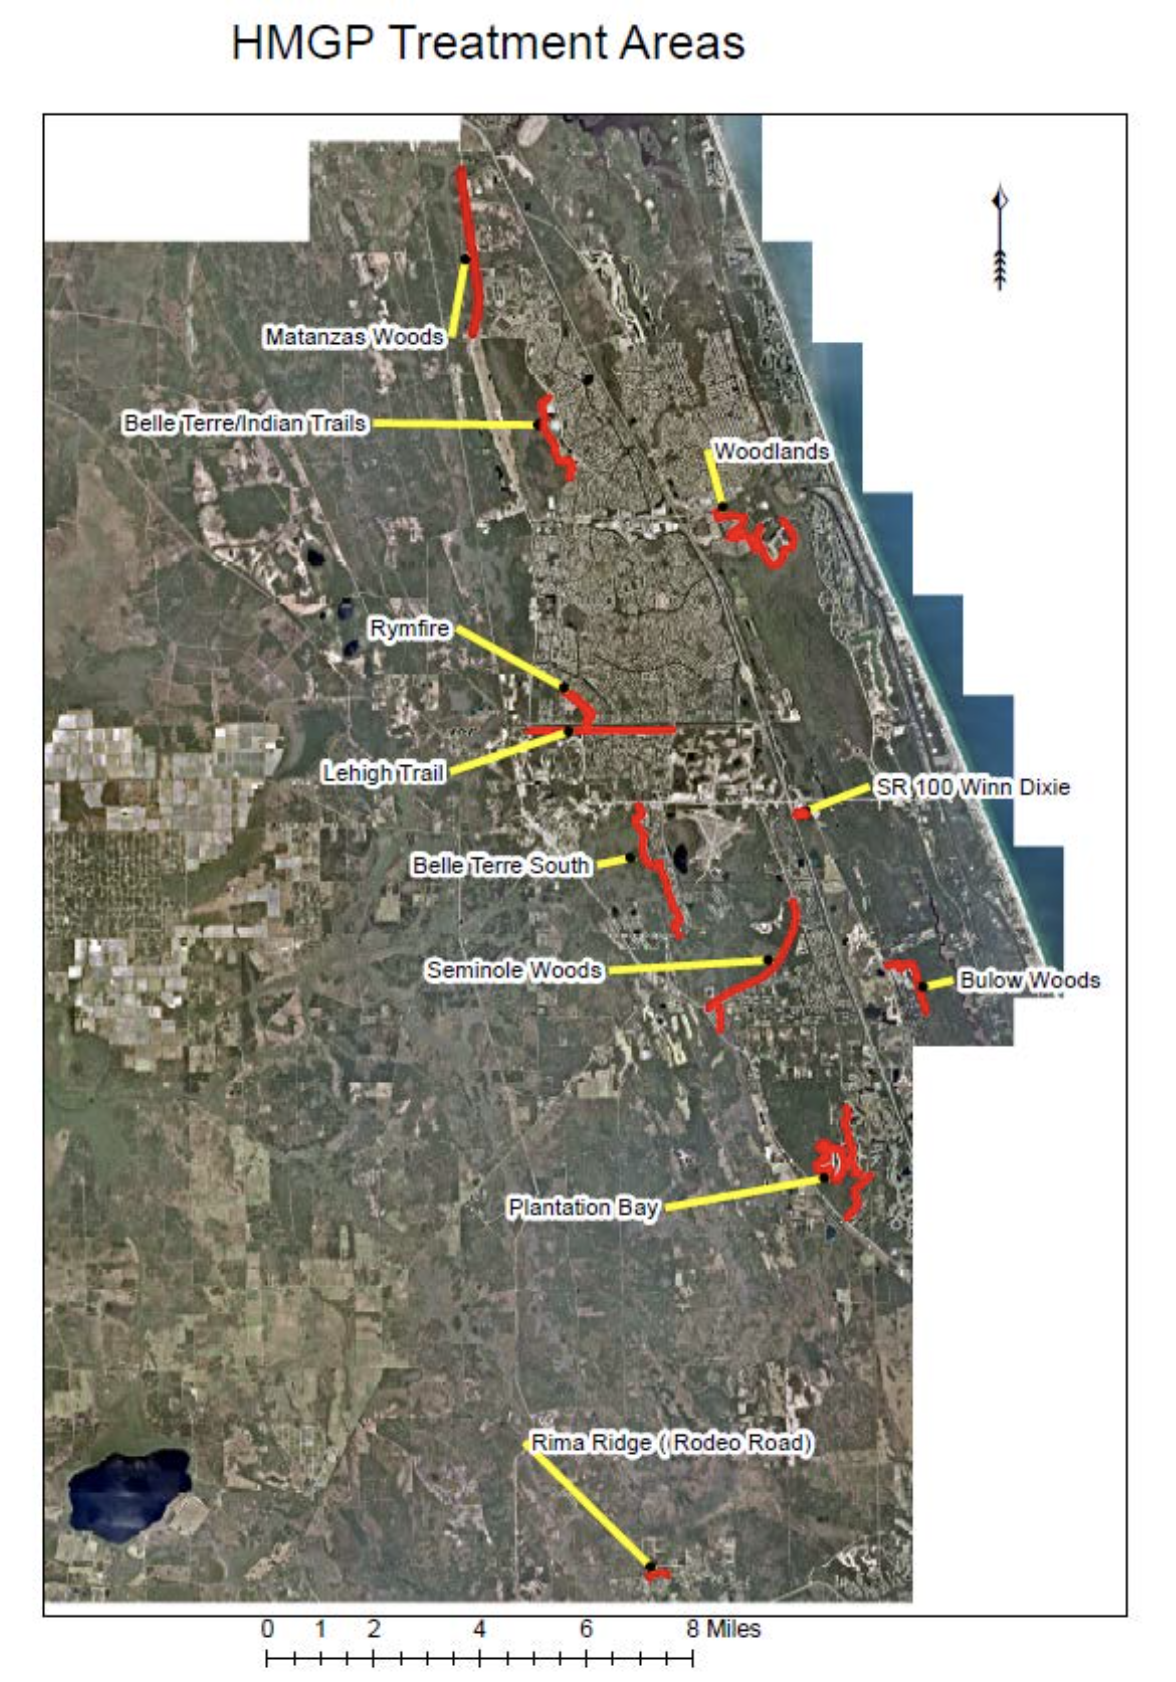 (Image courtesy of the Flagler County government)